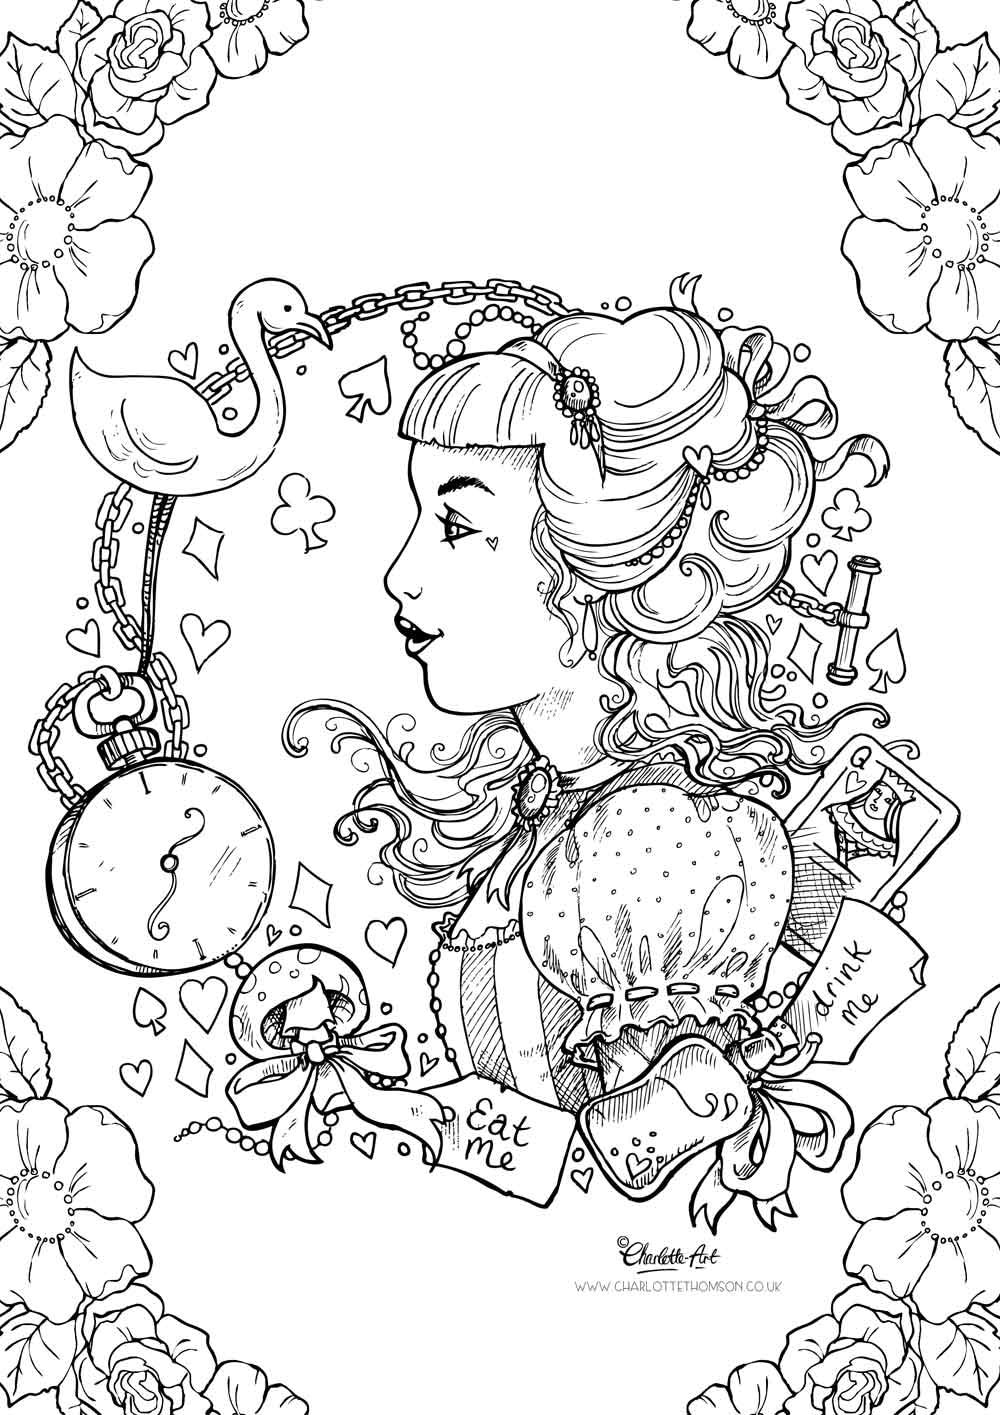 Adult Colouring Page. Alice in Wonderland Gothic Lolita Kawaii Victorian  Pin Up Girl Instant Download PDF and JPEG file for Coloring